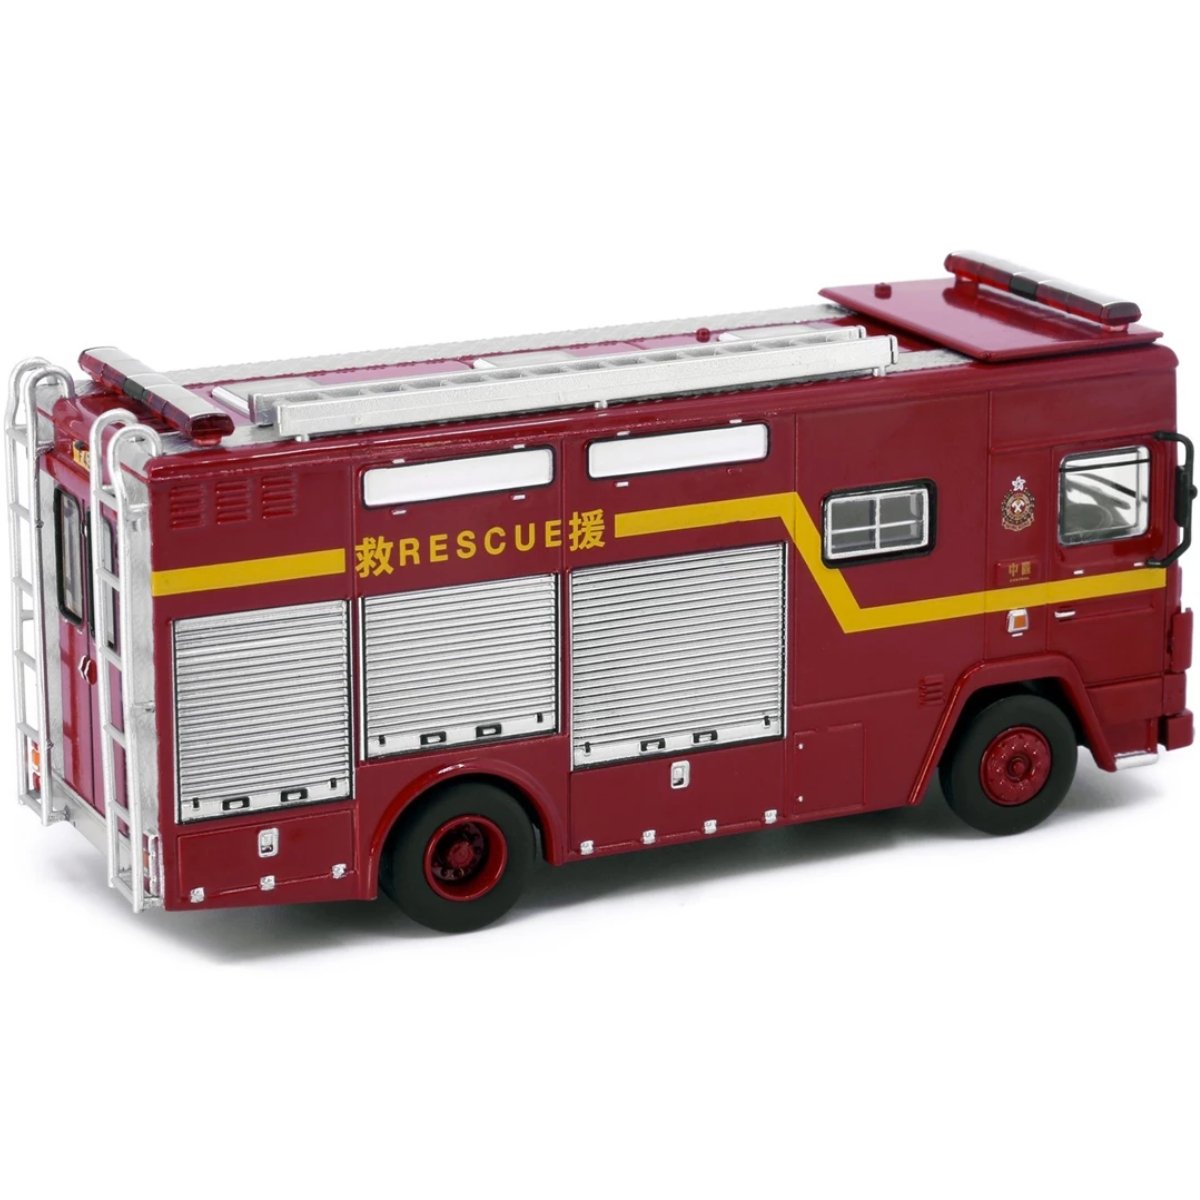 Tiny Models Dennis HKFSD Rescue Appliance F437 (1:76 Scale) - Phillips Hobbies